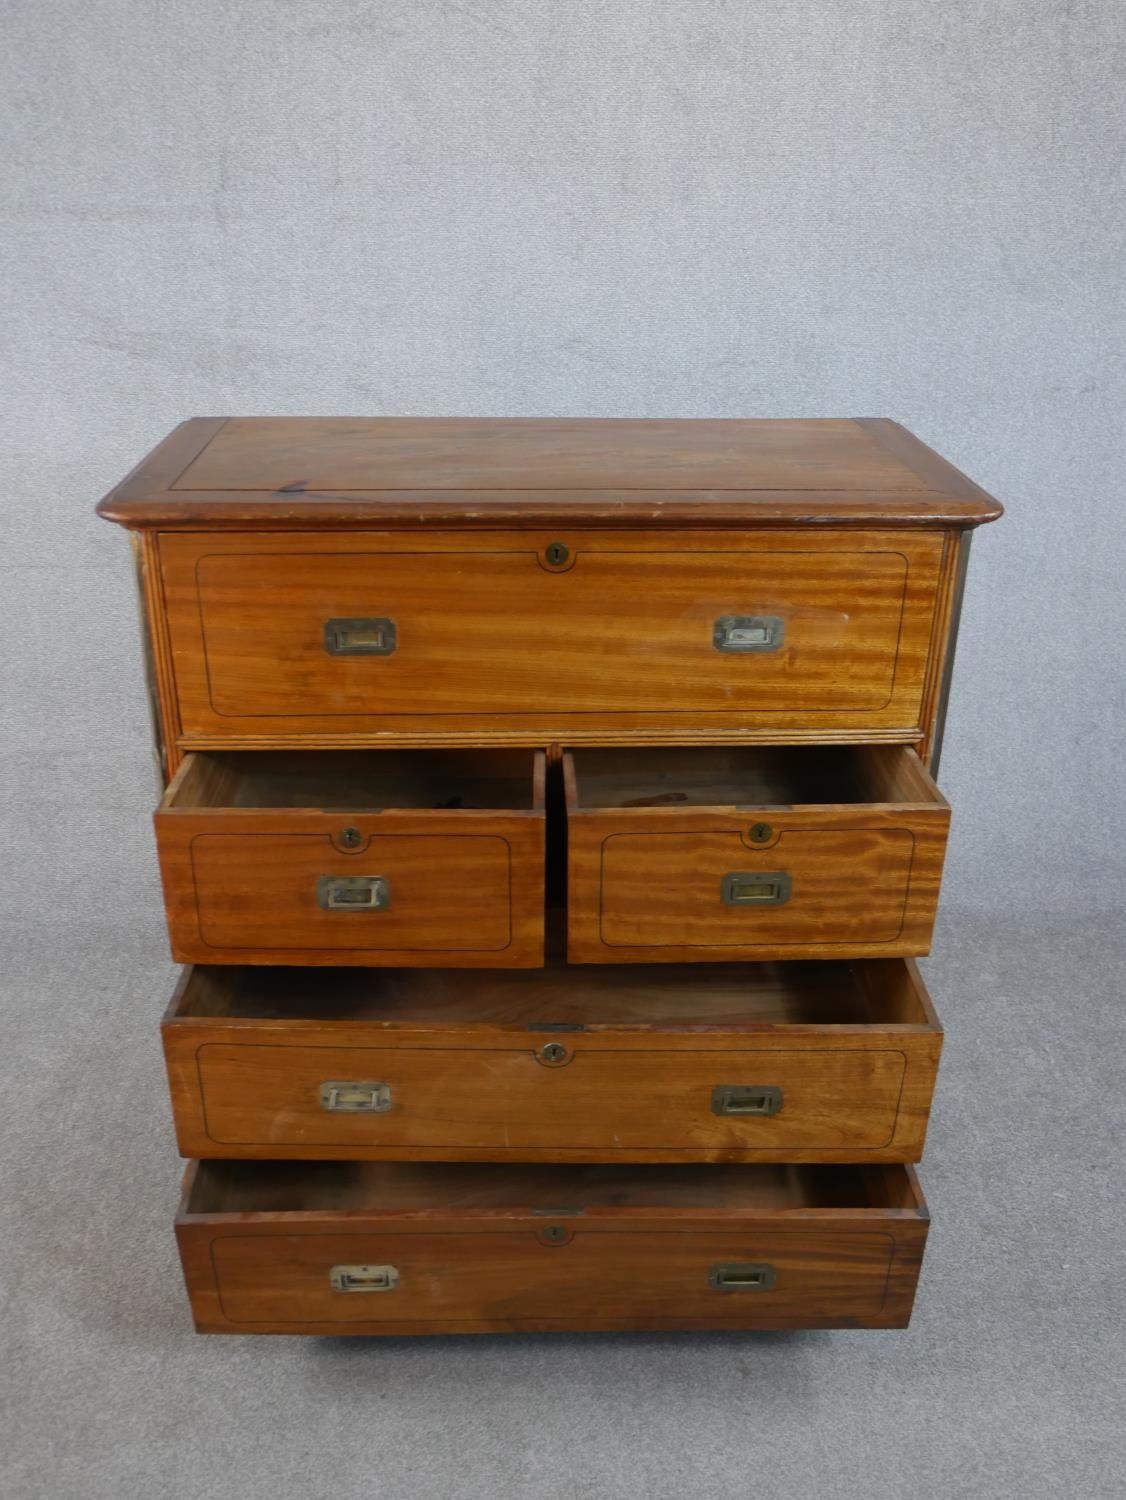 A 19th century camphorwood secretaire campaign chest, in two sections, with a secretaire drawer - Image 3 of 9